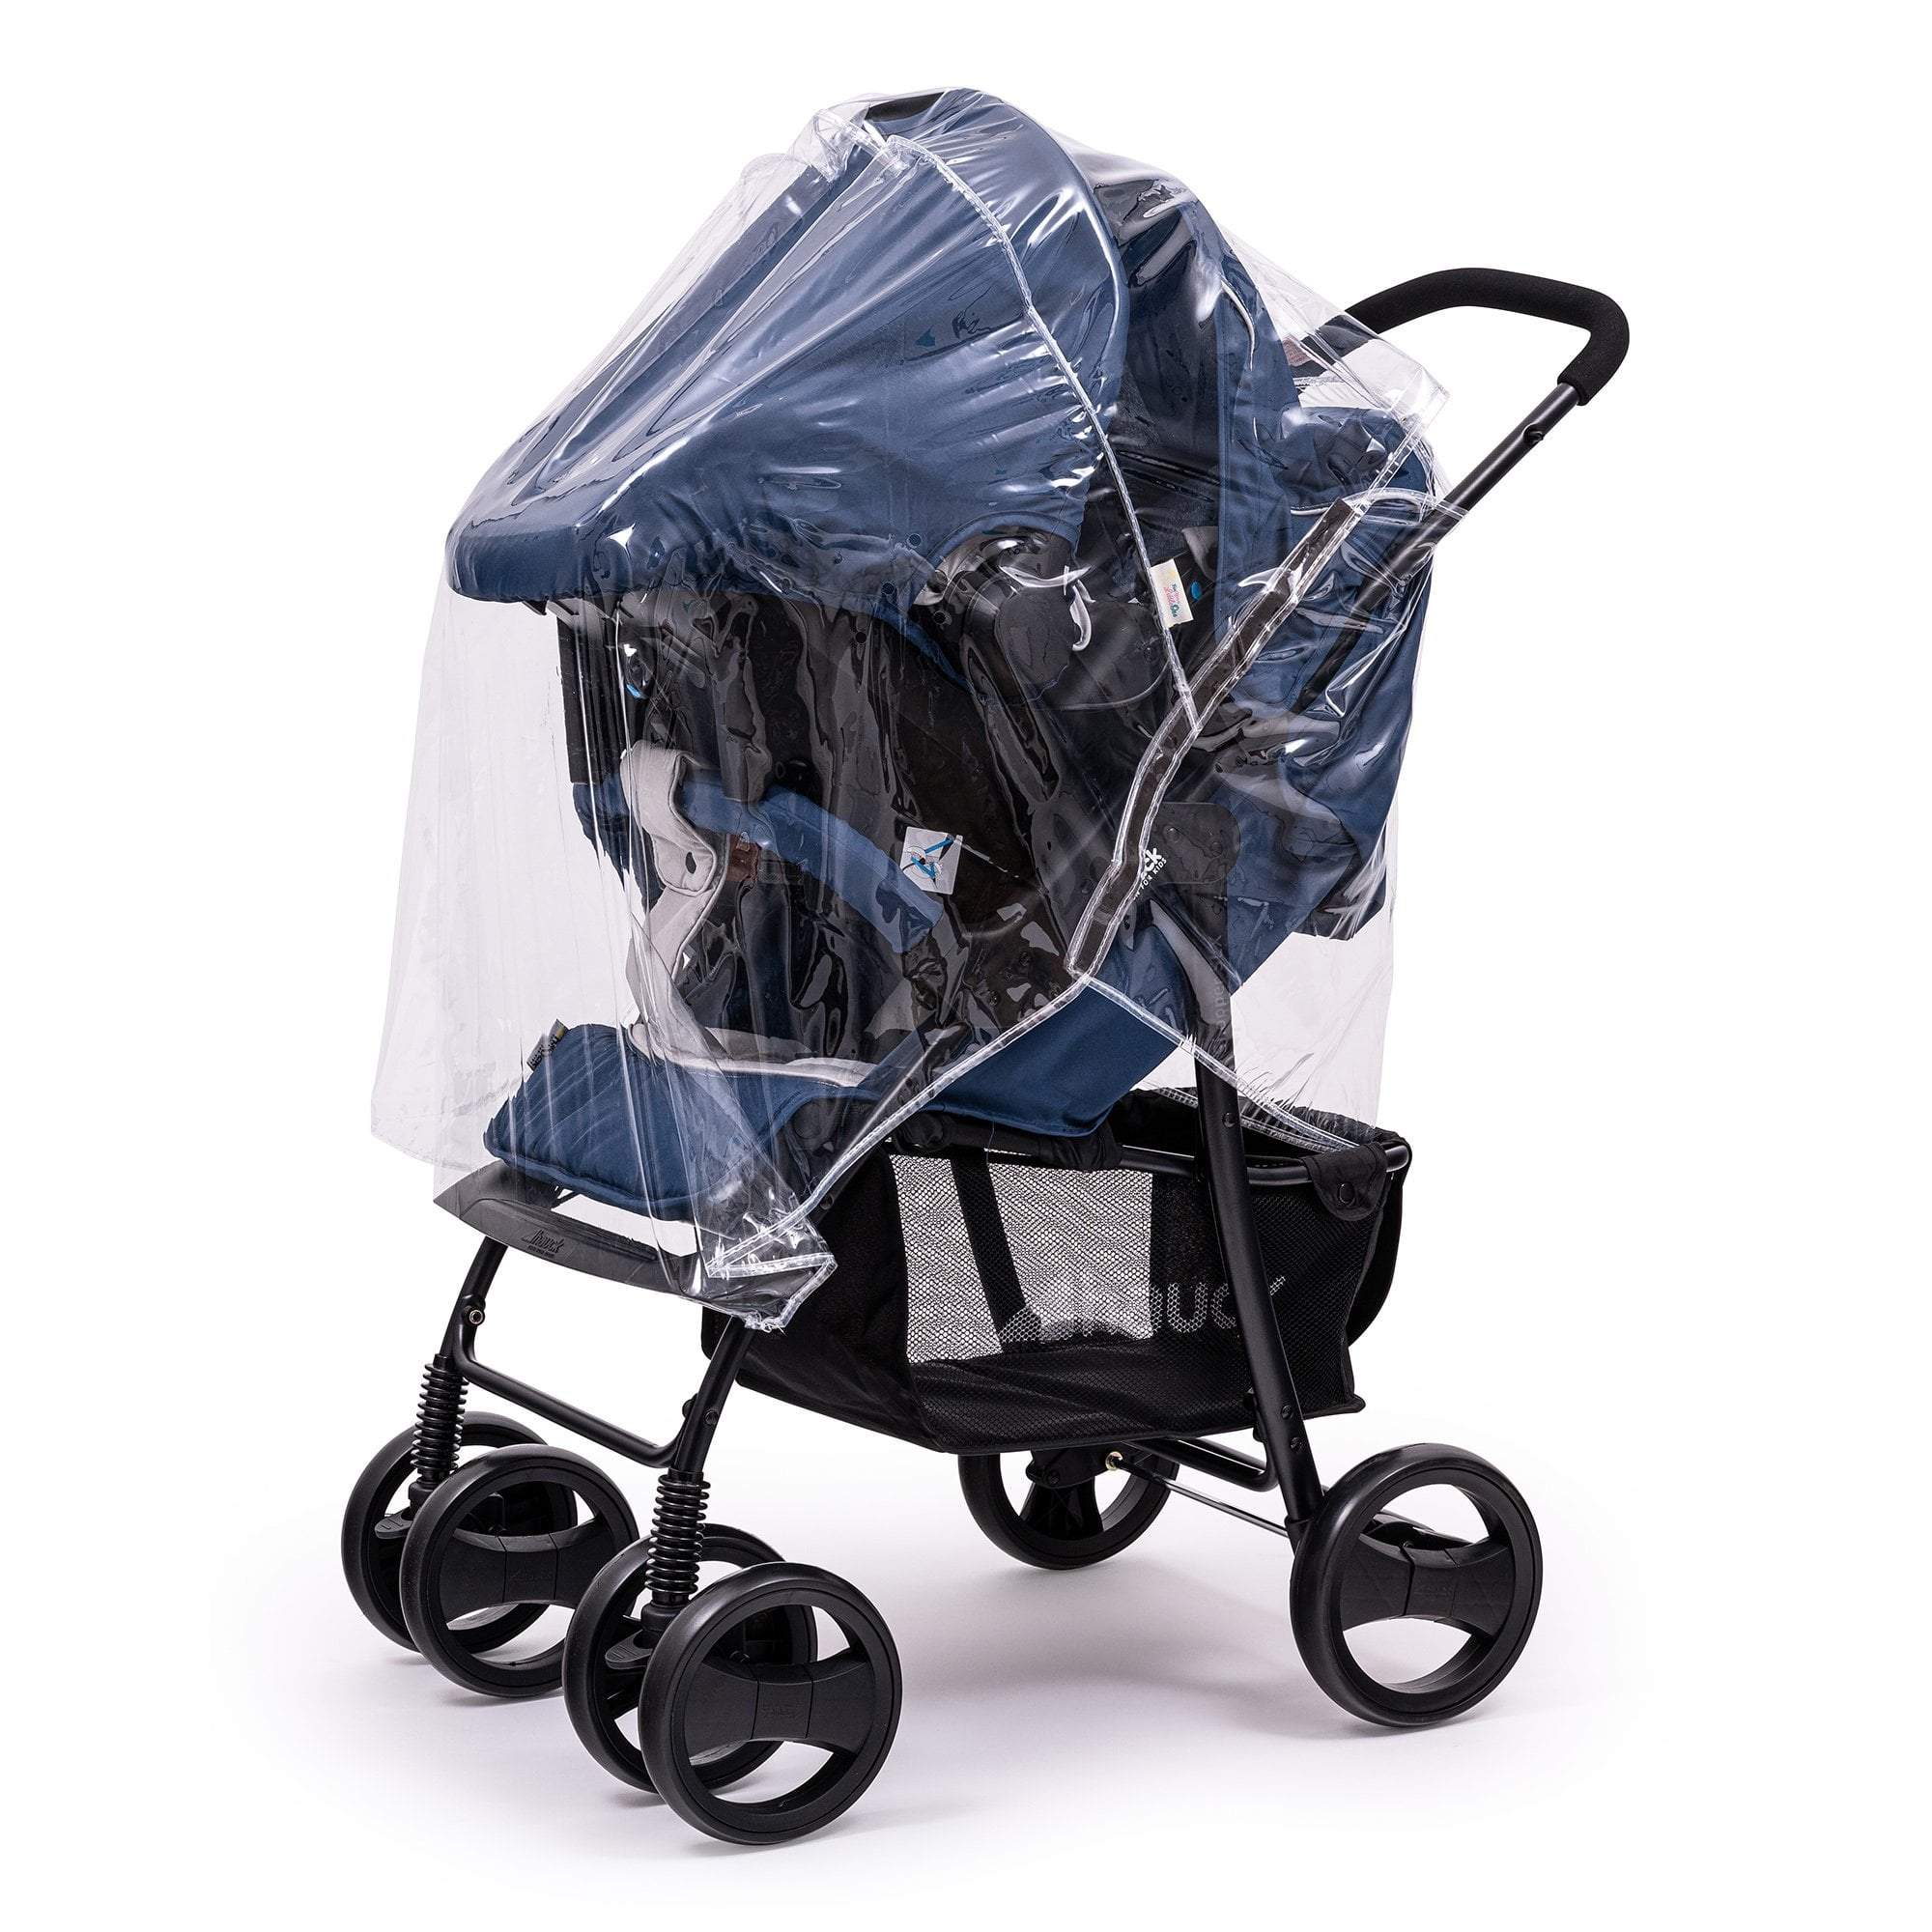 Travel System Raincover Compatible with Tutti Bambini - Fits All Models - For Your Little One